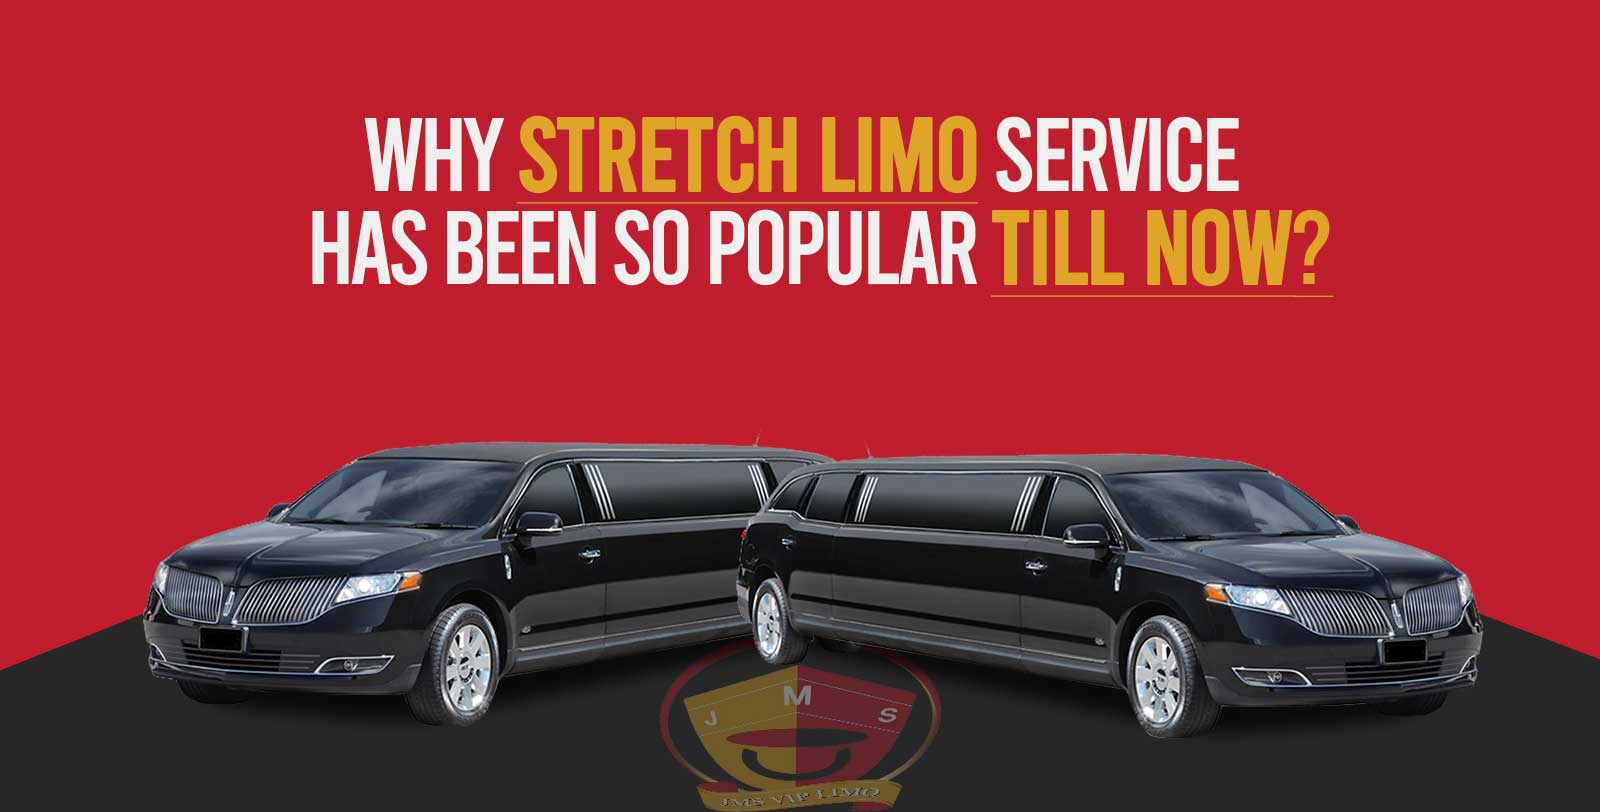 Why Stretch Limo Service Has Been So Popular Till Now?